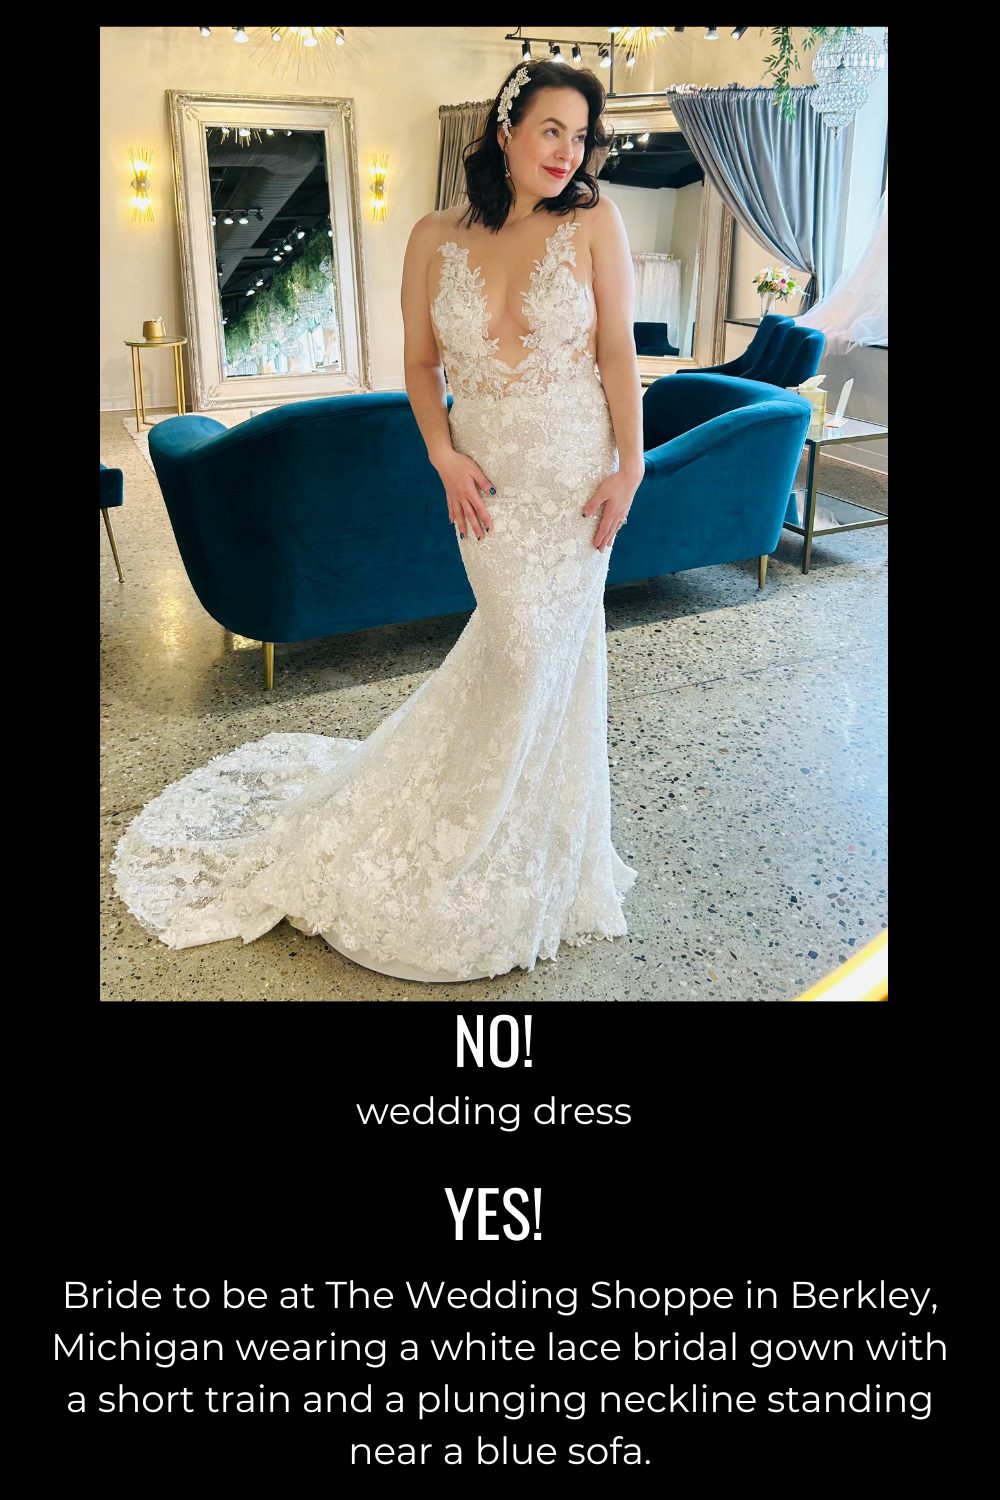 Bride to be wearing a white lace bridal gown with a short train and a plunging neckline standing near a blue sofa. Caption shows examples of good and bad alt text.